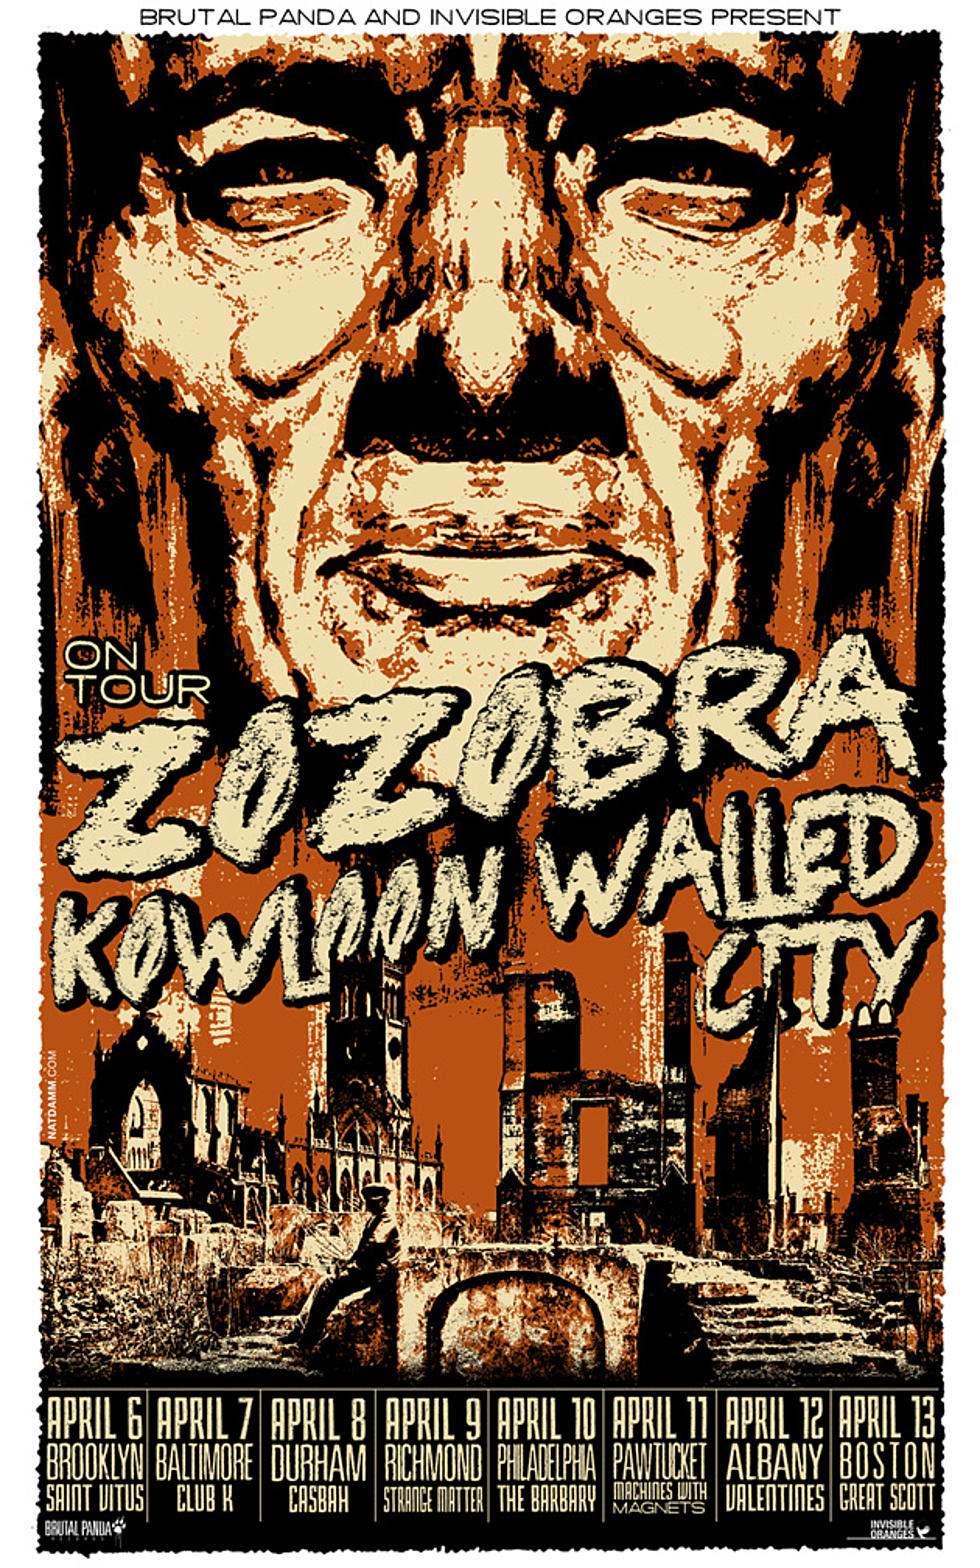 Zozobra ready new album, announce East Coast tour with Kowloon Walled City